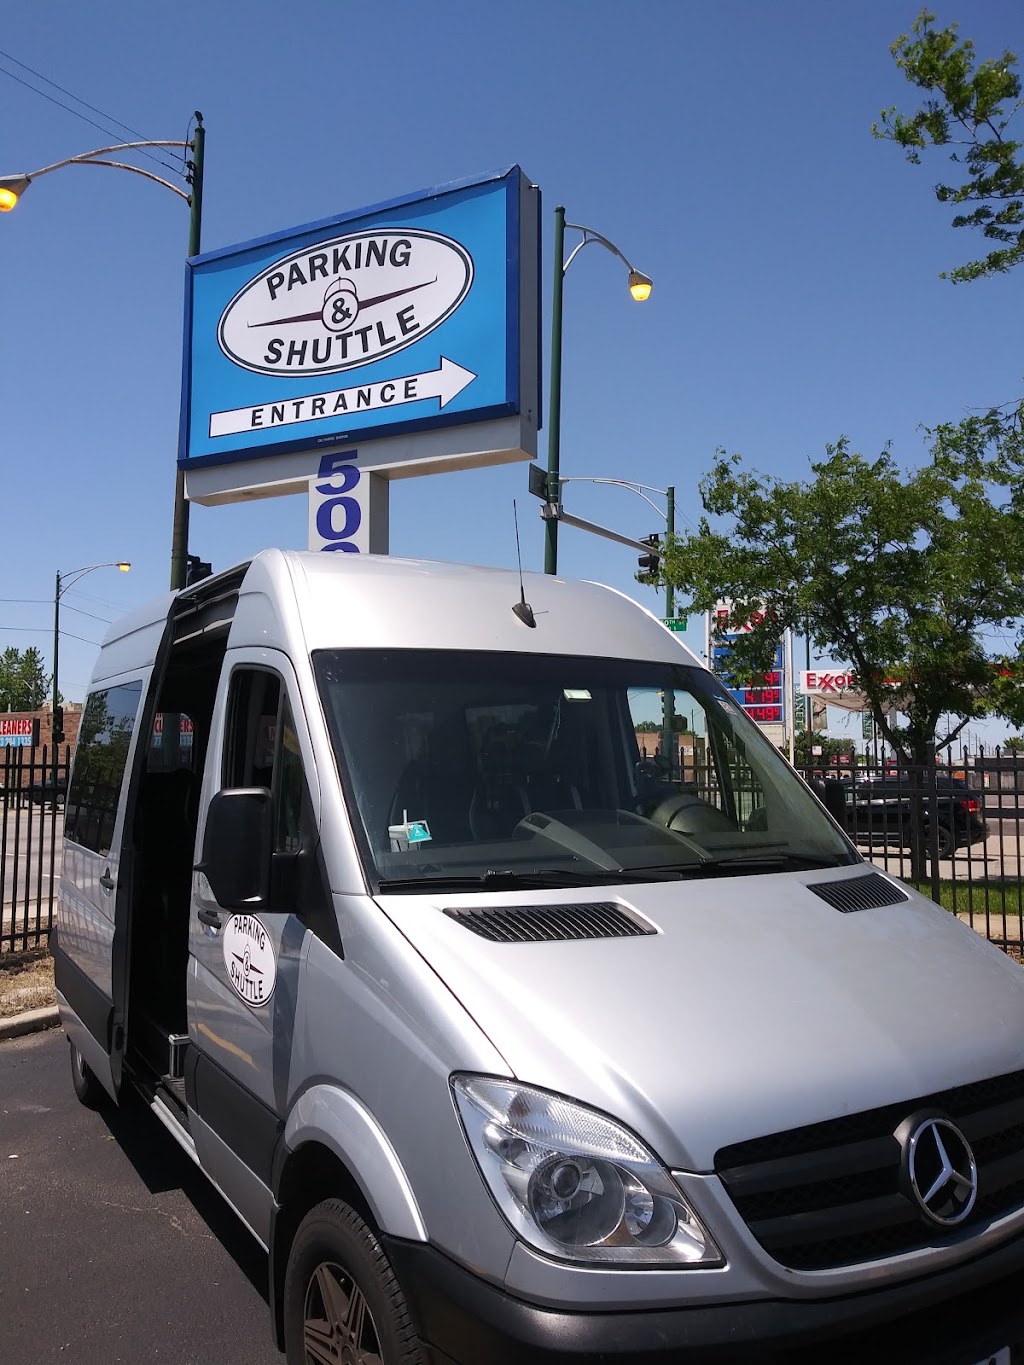 Parking & Shuttle, Inc. | 5001 S Cicero Ave, Chicago, IL 60632 | Phone: (847) 873-6617